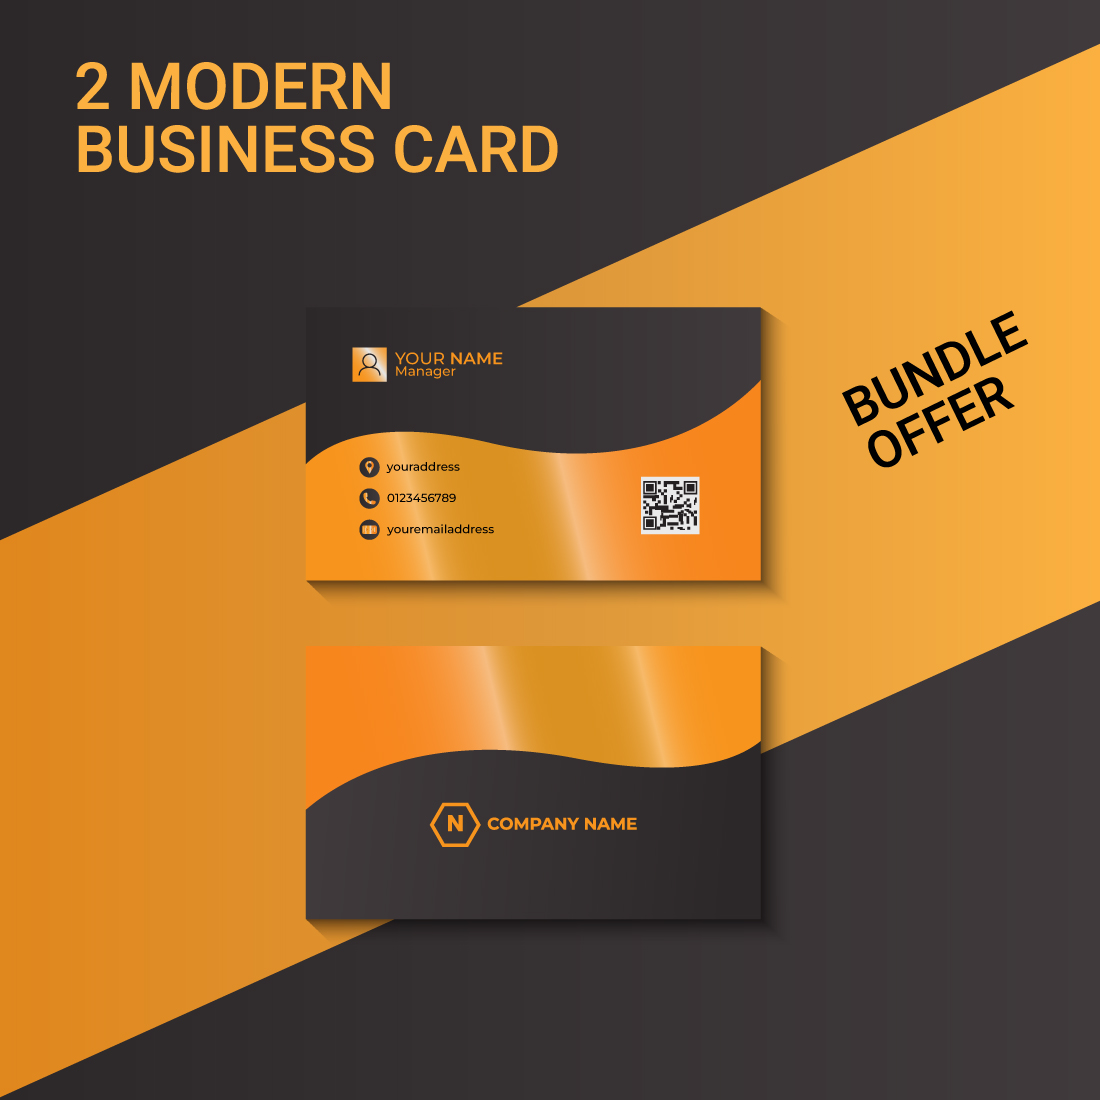 Business card with a gold and black design.